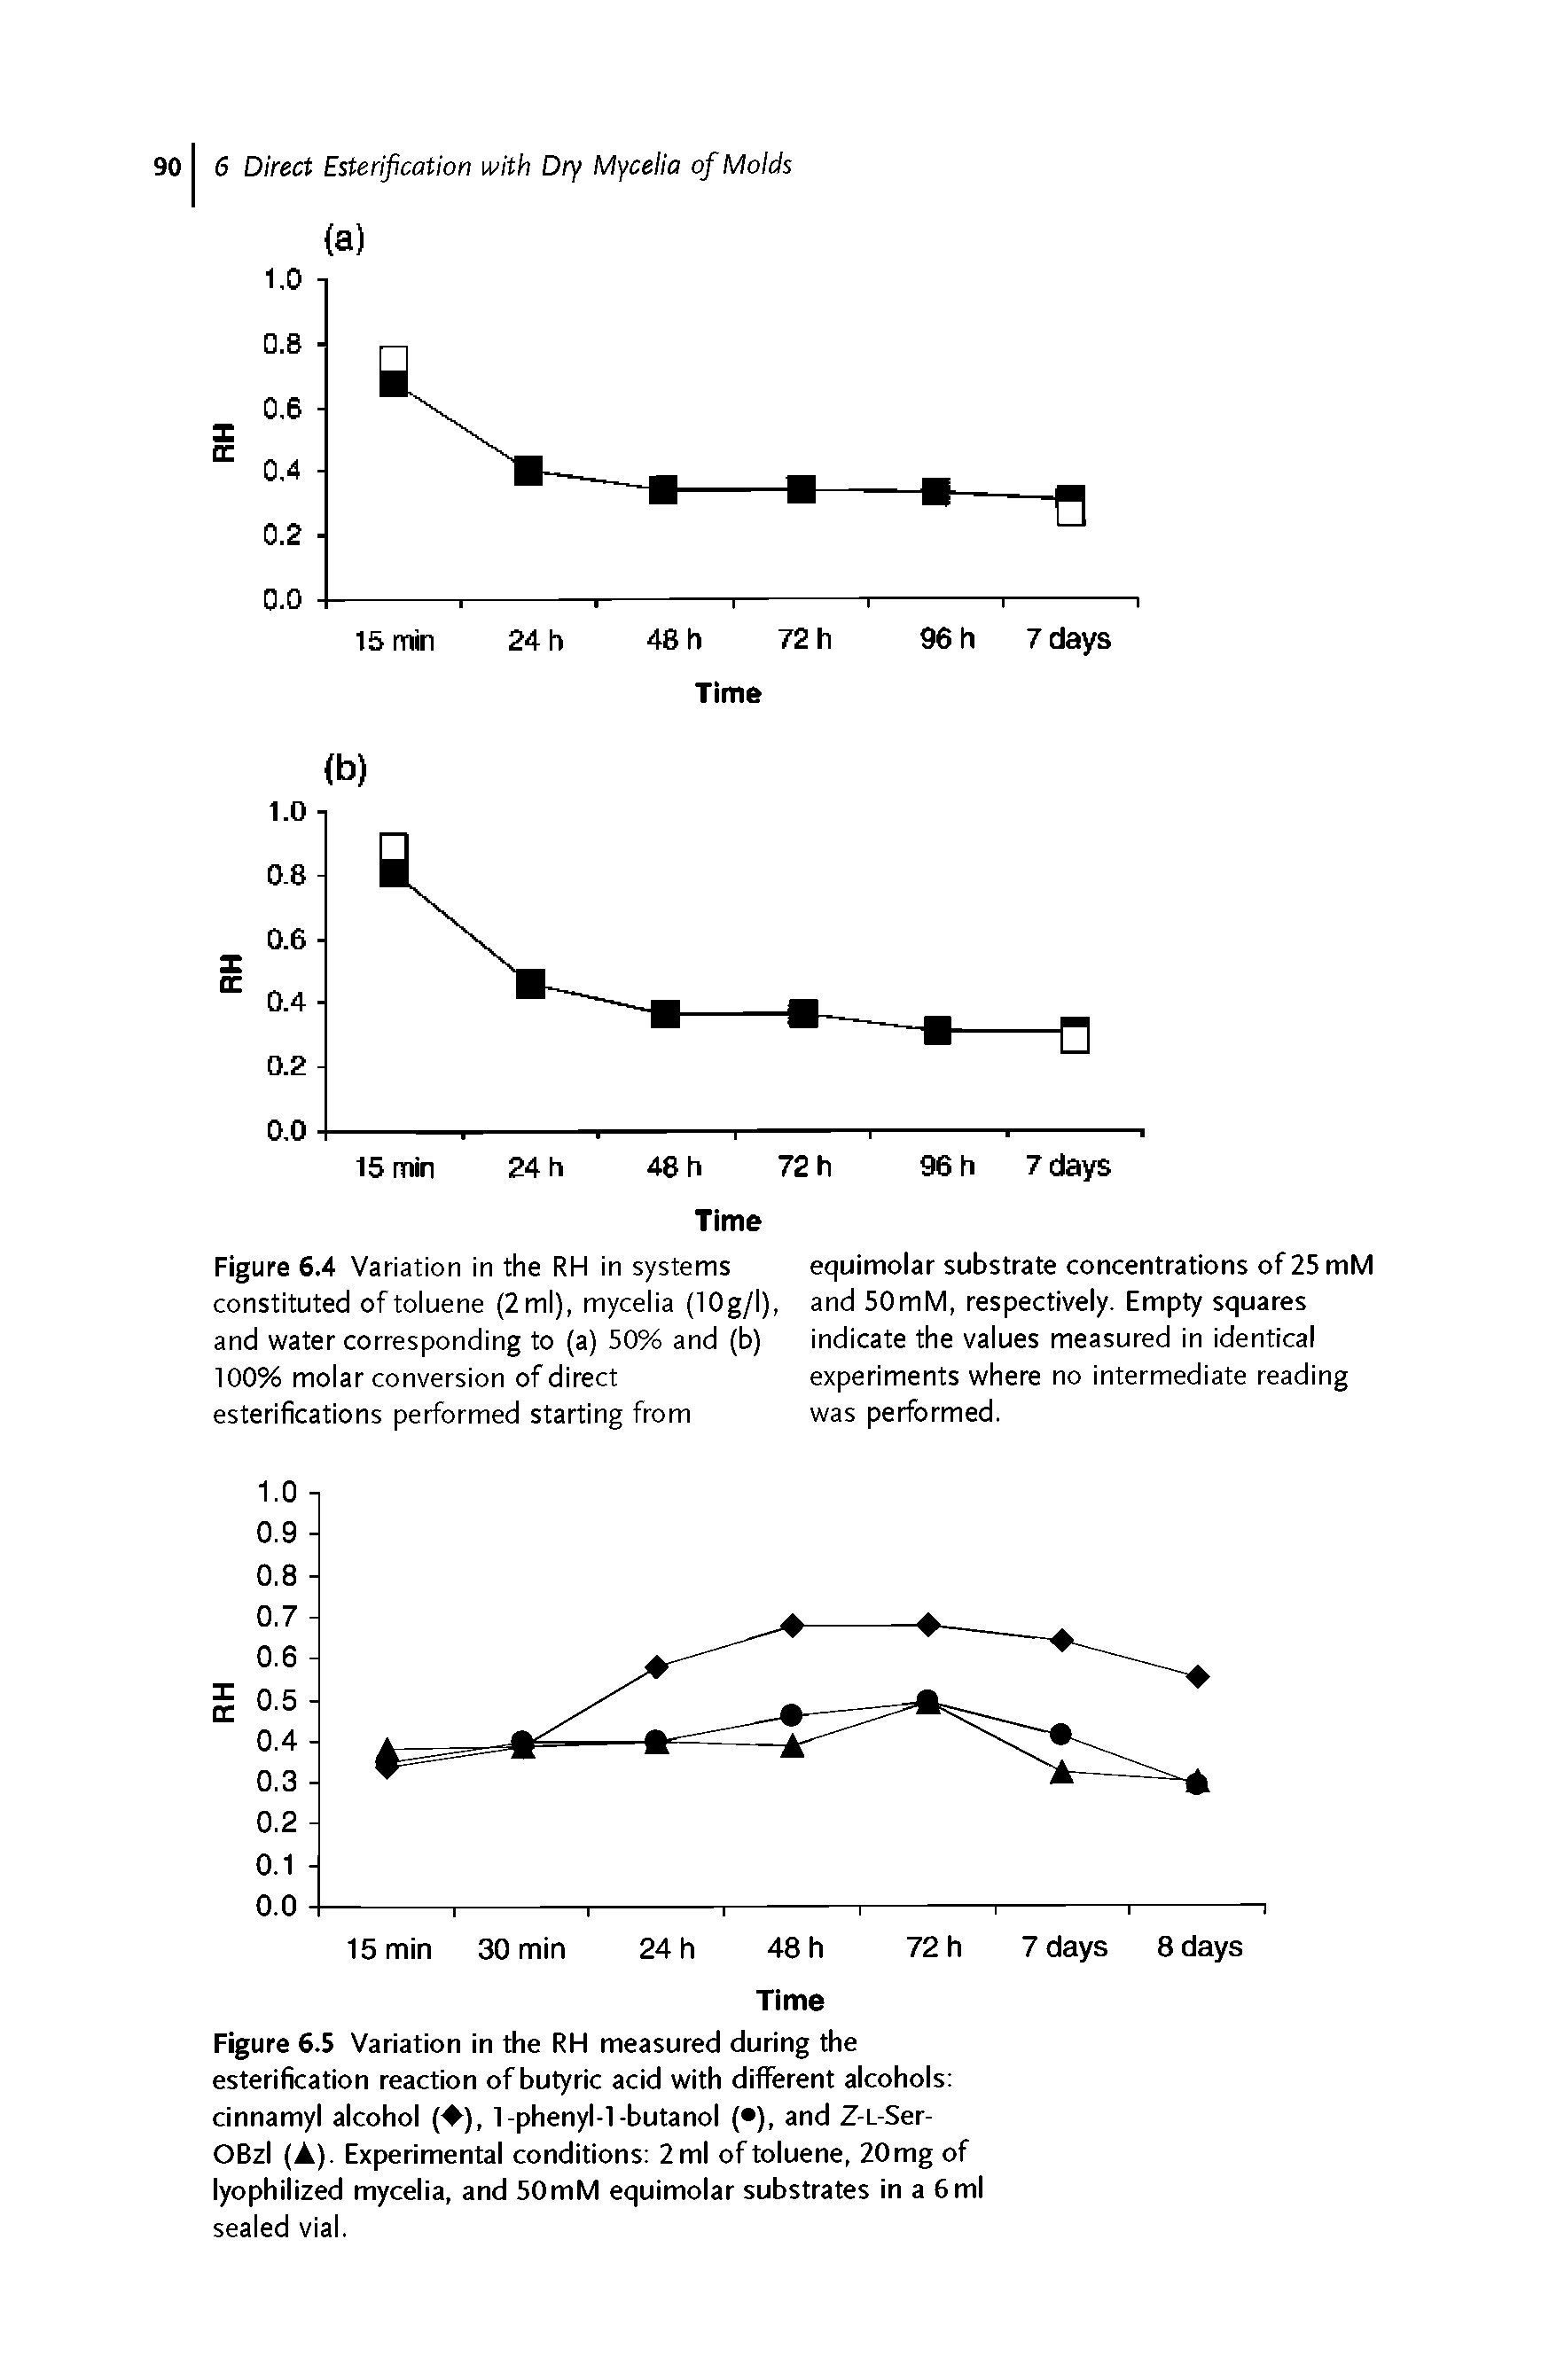 Figure 6.5 Variation in the RH measured during the esterification reaction of butyric acid with different alcohols cinnamyl alcohol ( ), 1-phenyl-1-butanol ( ), and Z-L-Ser-OBzl (A). Experimental conditions 2 ml of toluene, 20 mg of lyophilized mycelia, and 50mM equimolar substrates in a 6ml sealed vial.